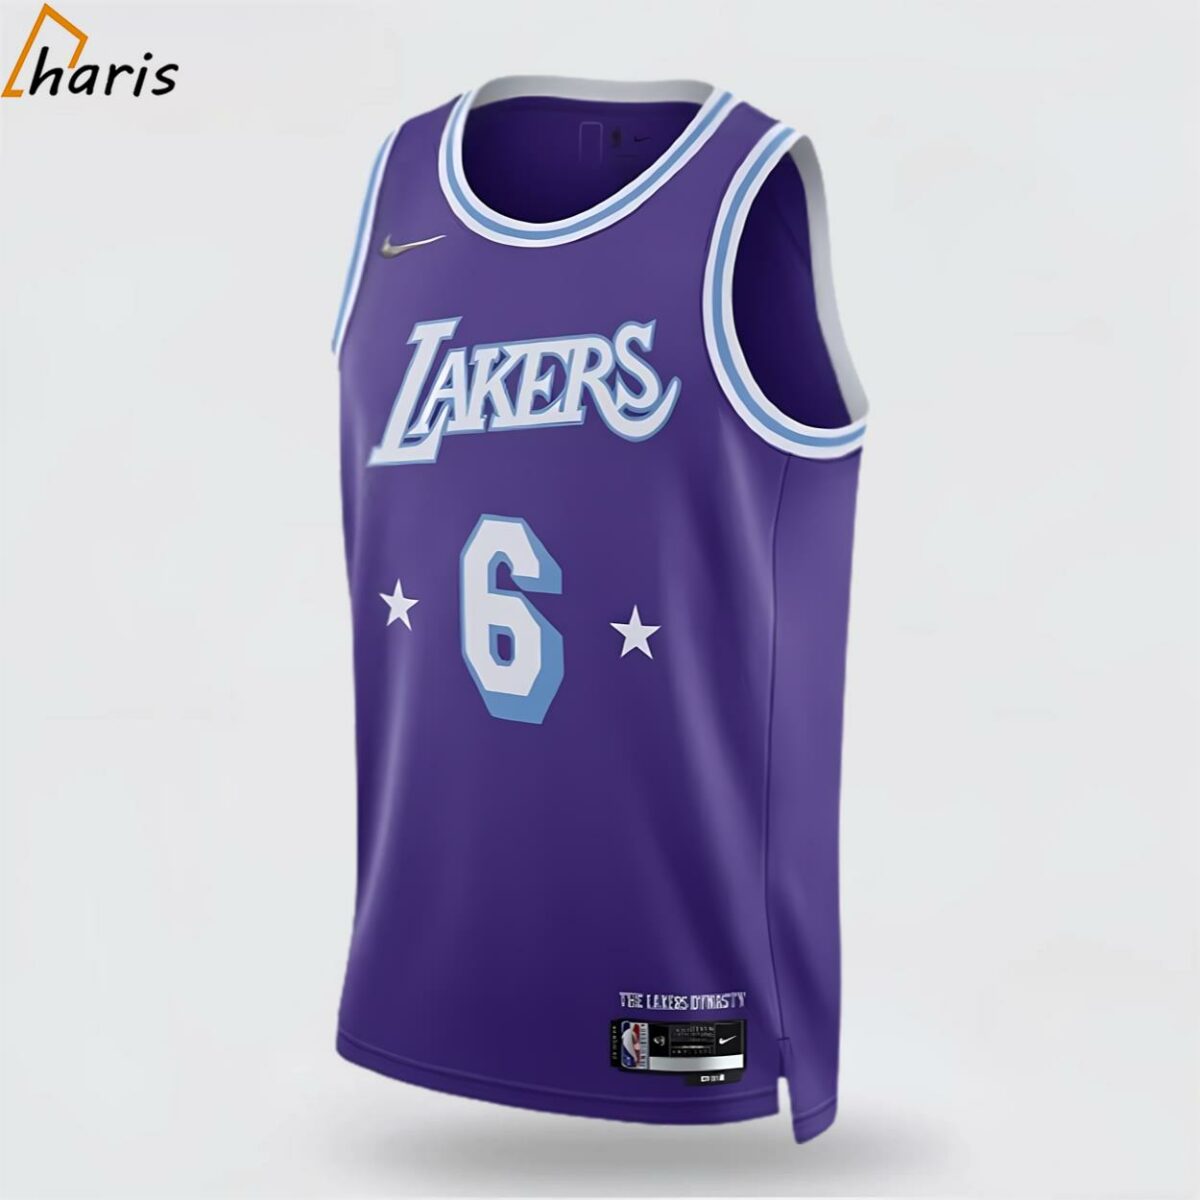 Los Angeles Lakers 2023 24 City Edition Uniform The California Dream Lakers Jersey 1 jersey